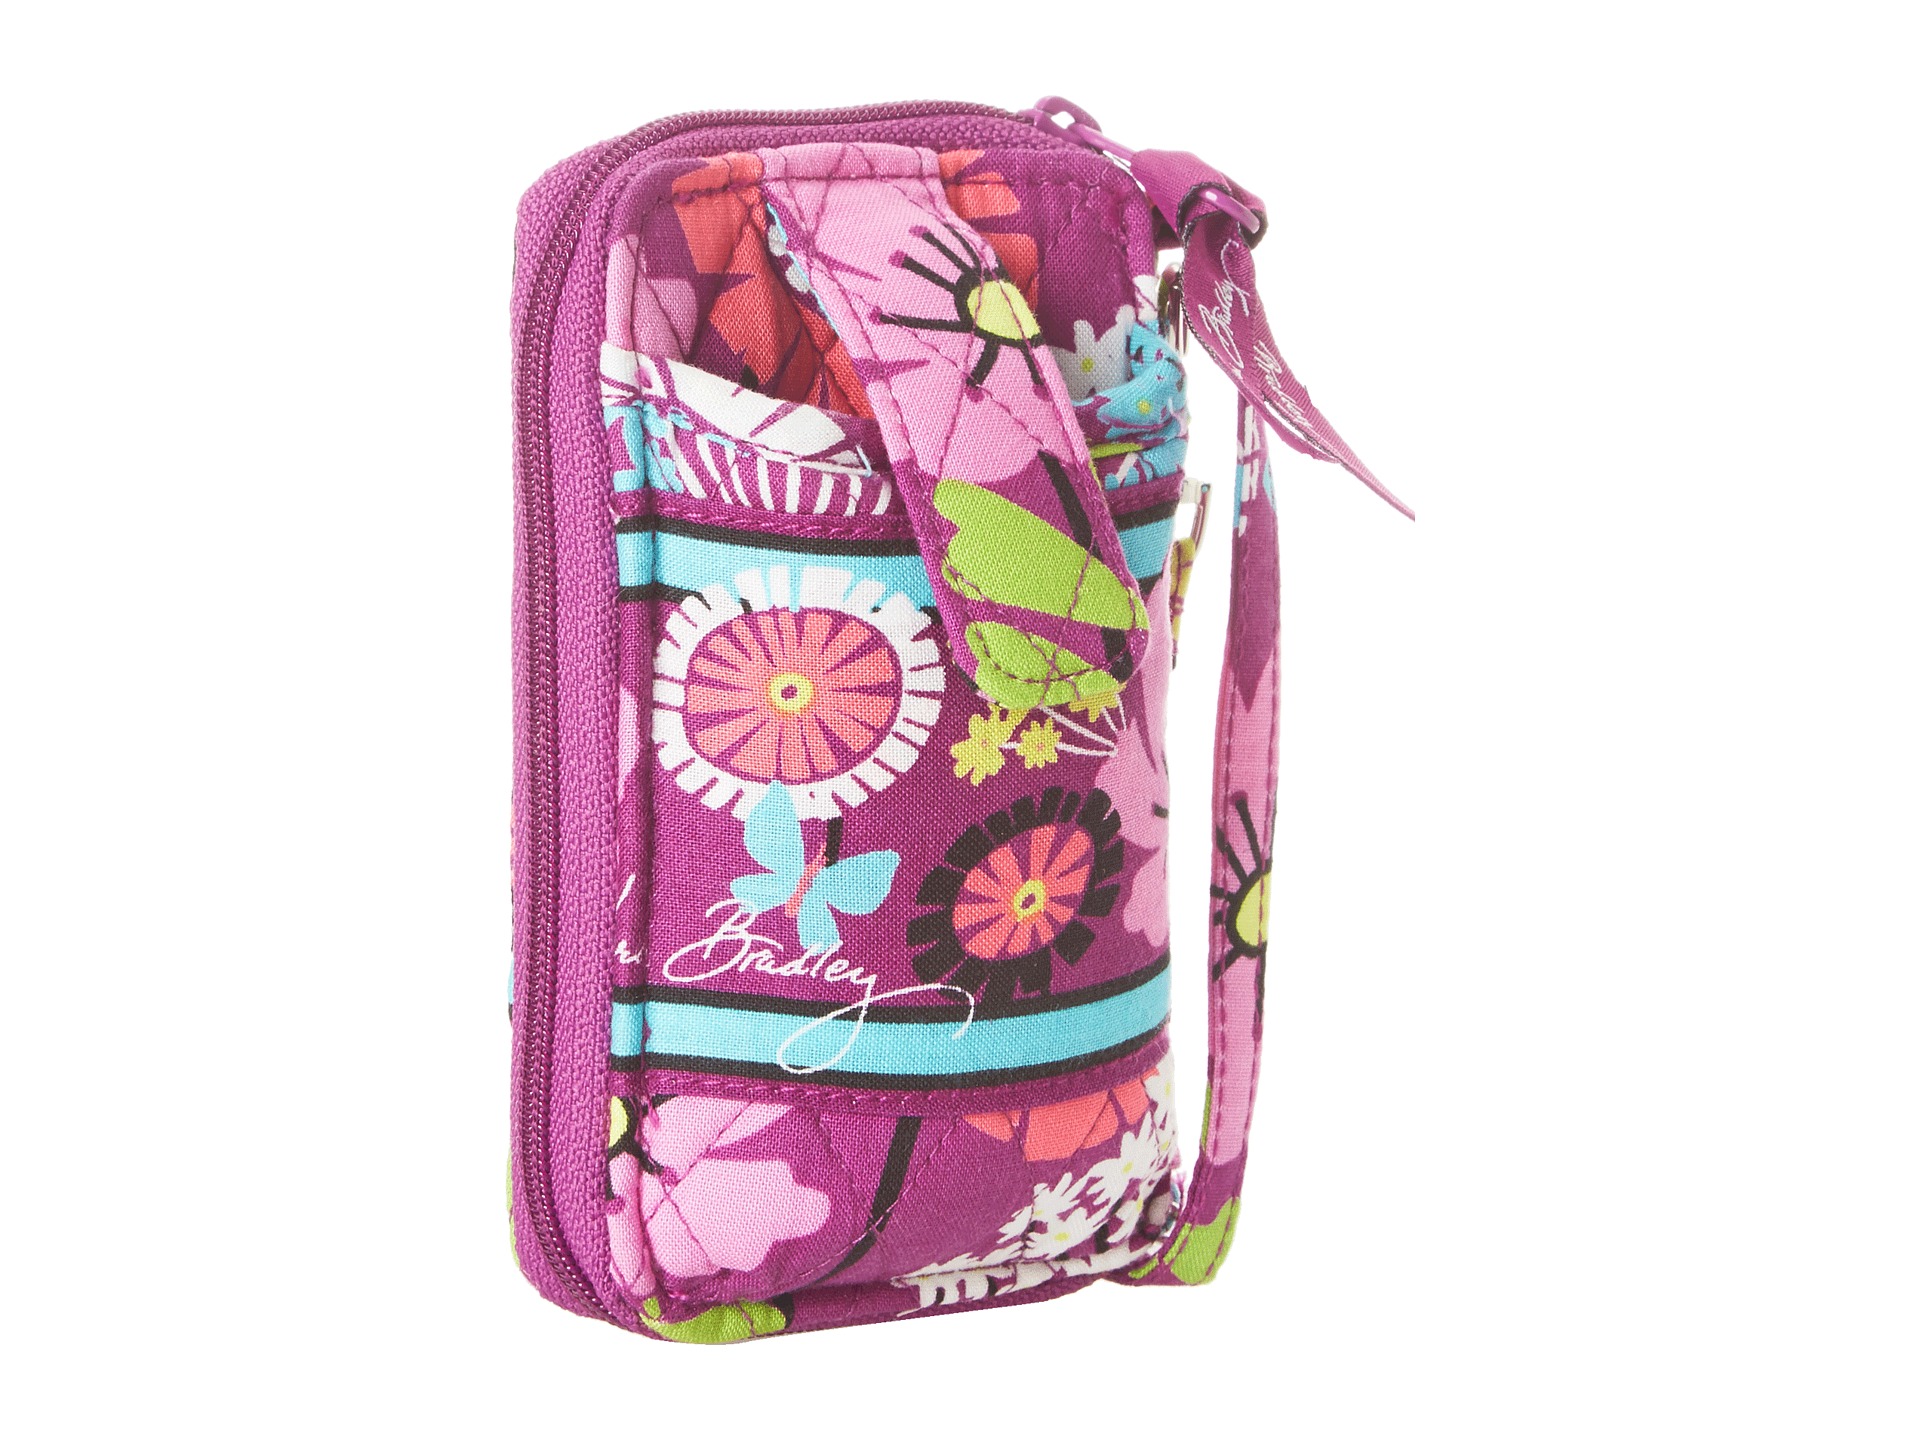 Vera Bradley Carry It All Wristlet | Shipped Free at Zappos